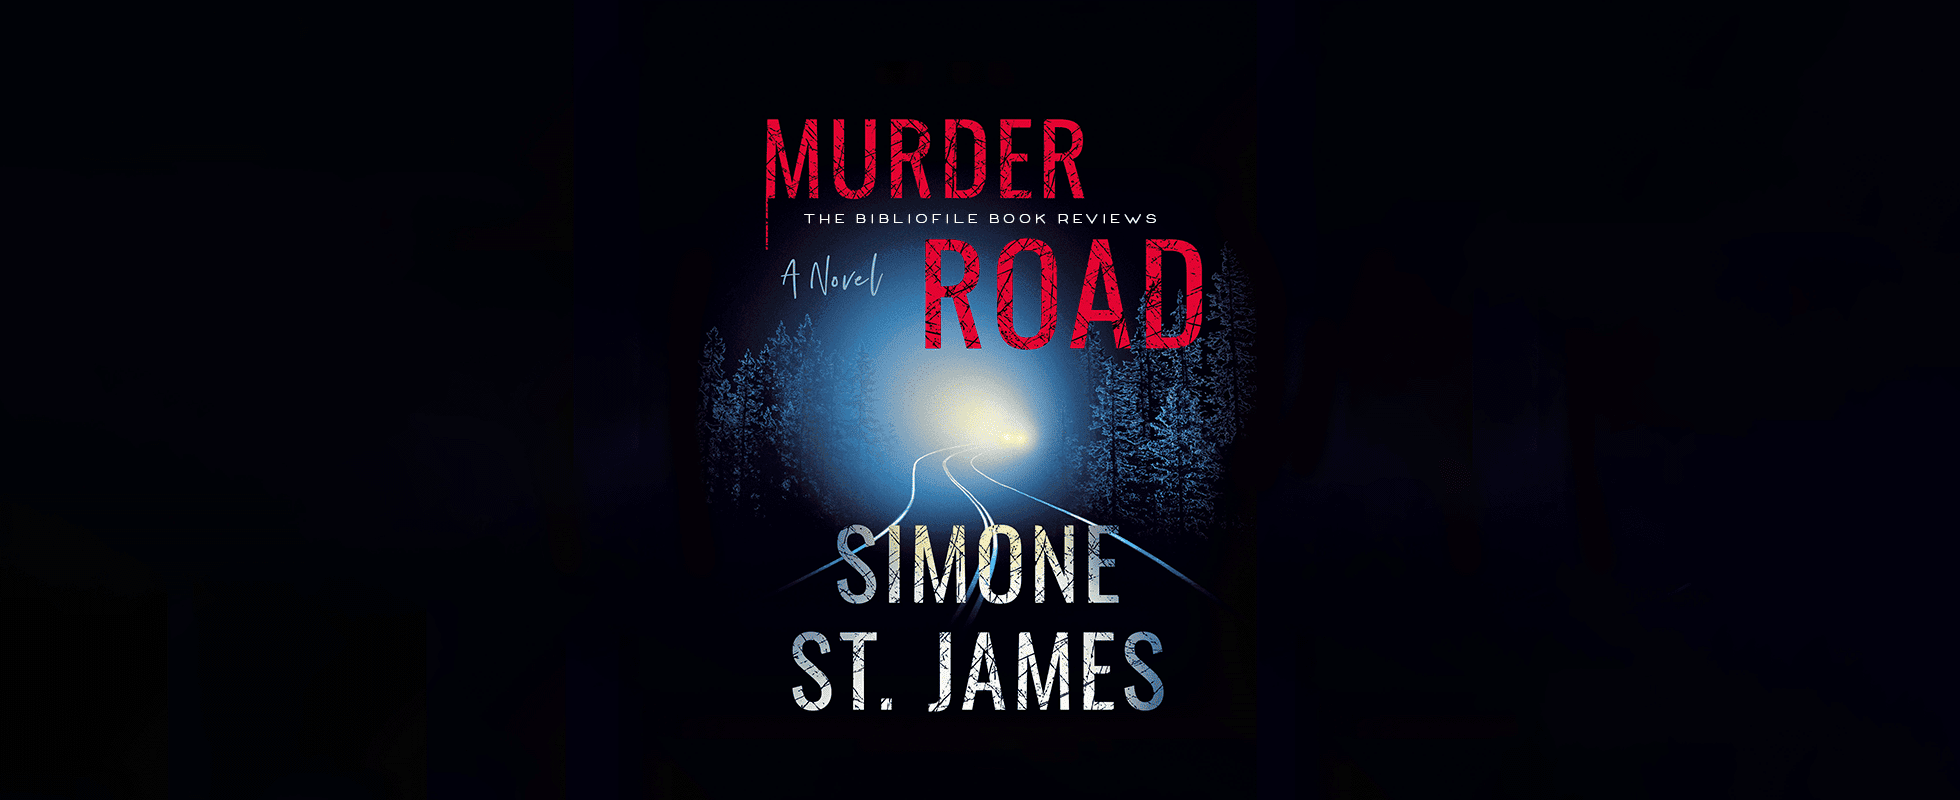 murder road by simone st. james book review plot summary synopsis recap discussion spoilers